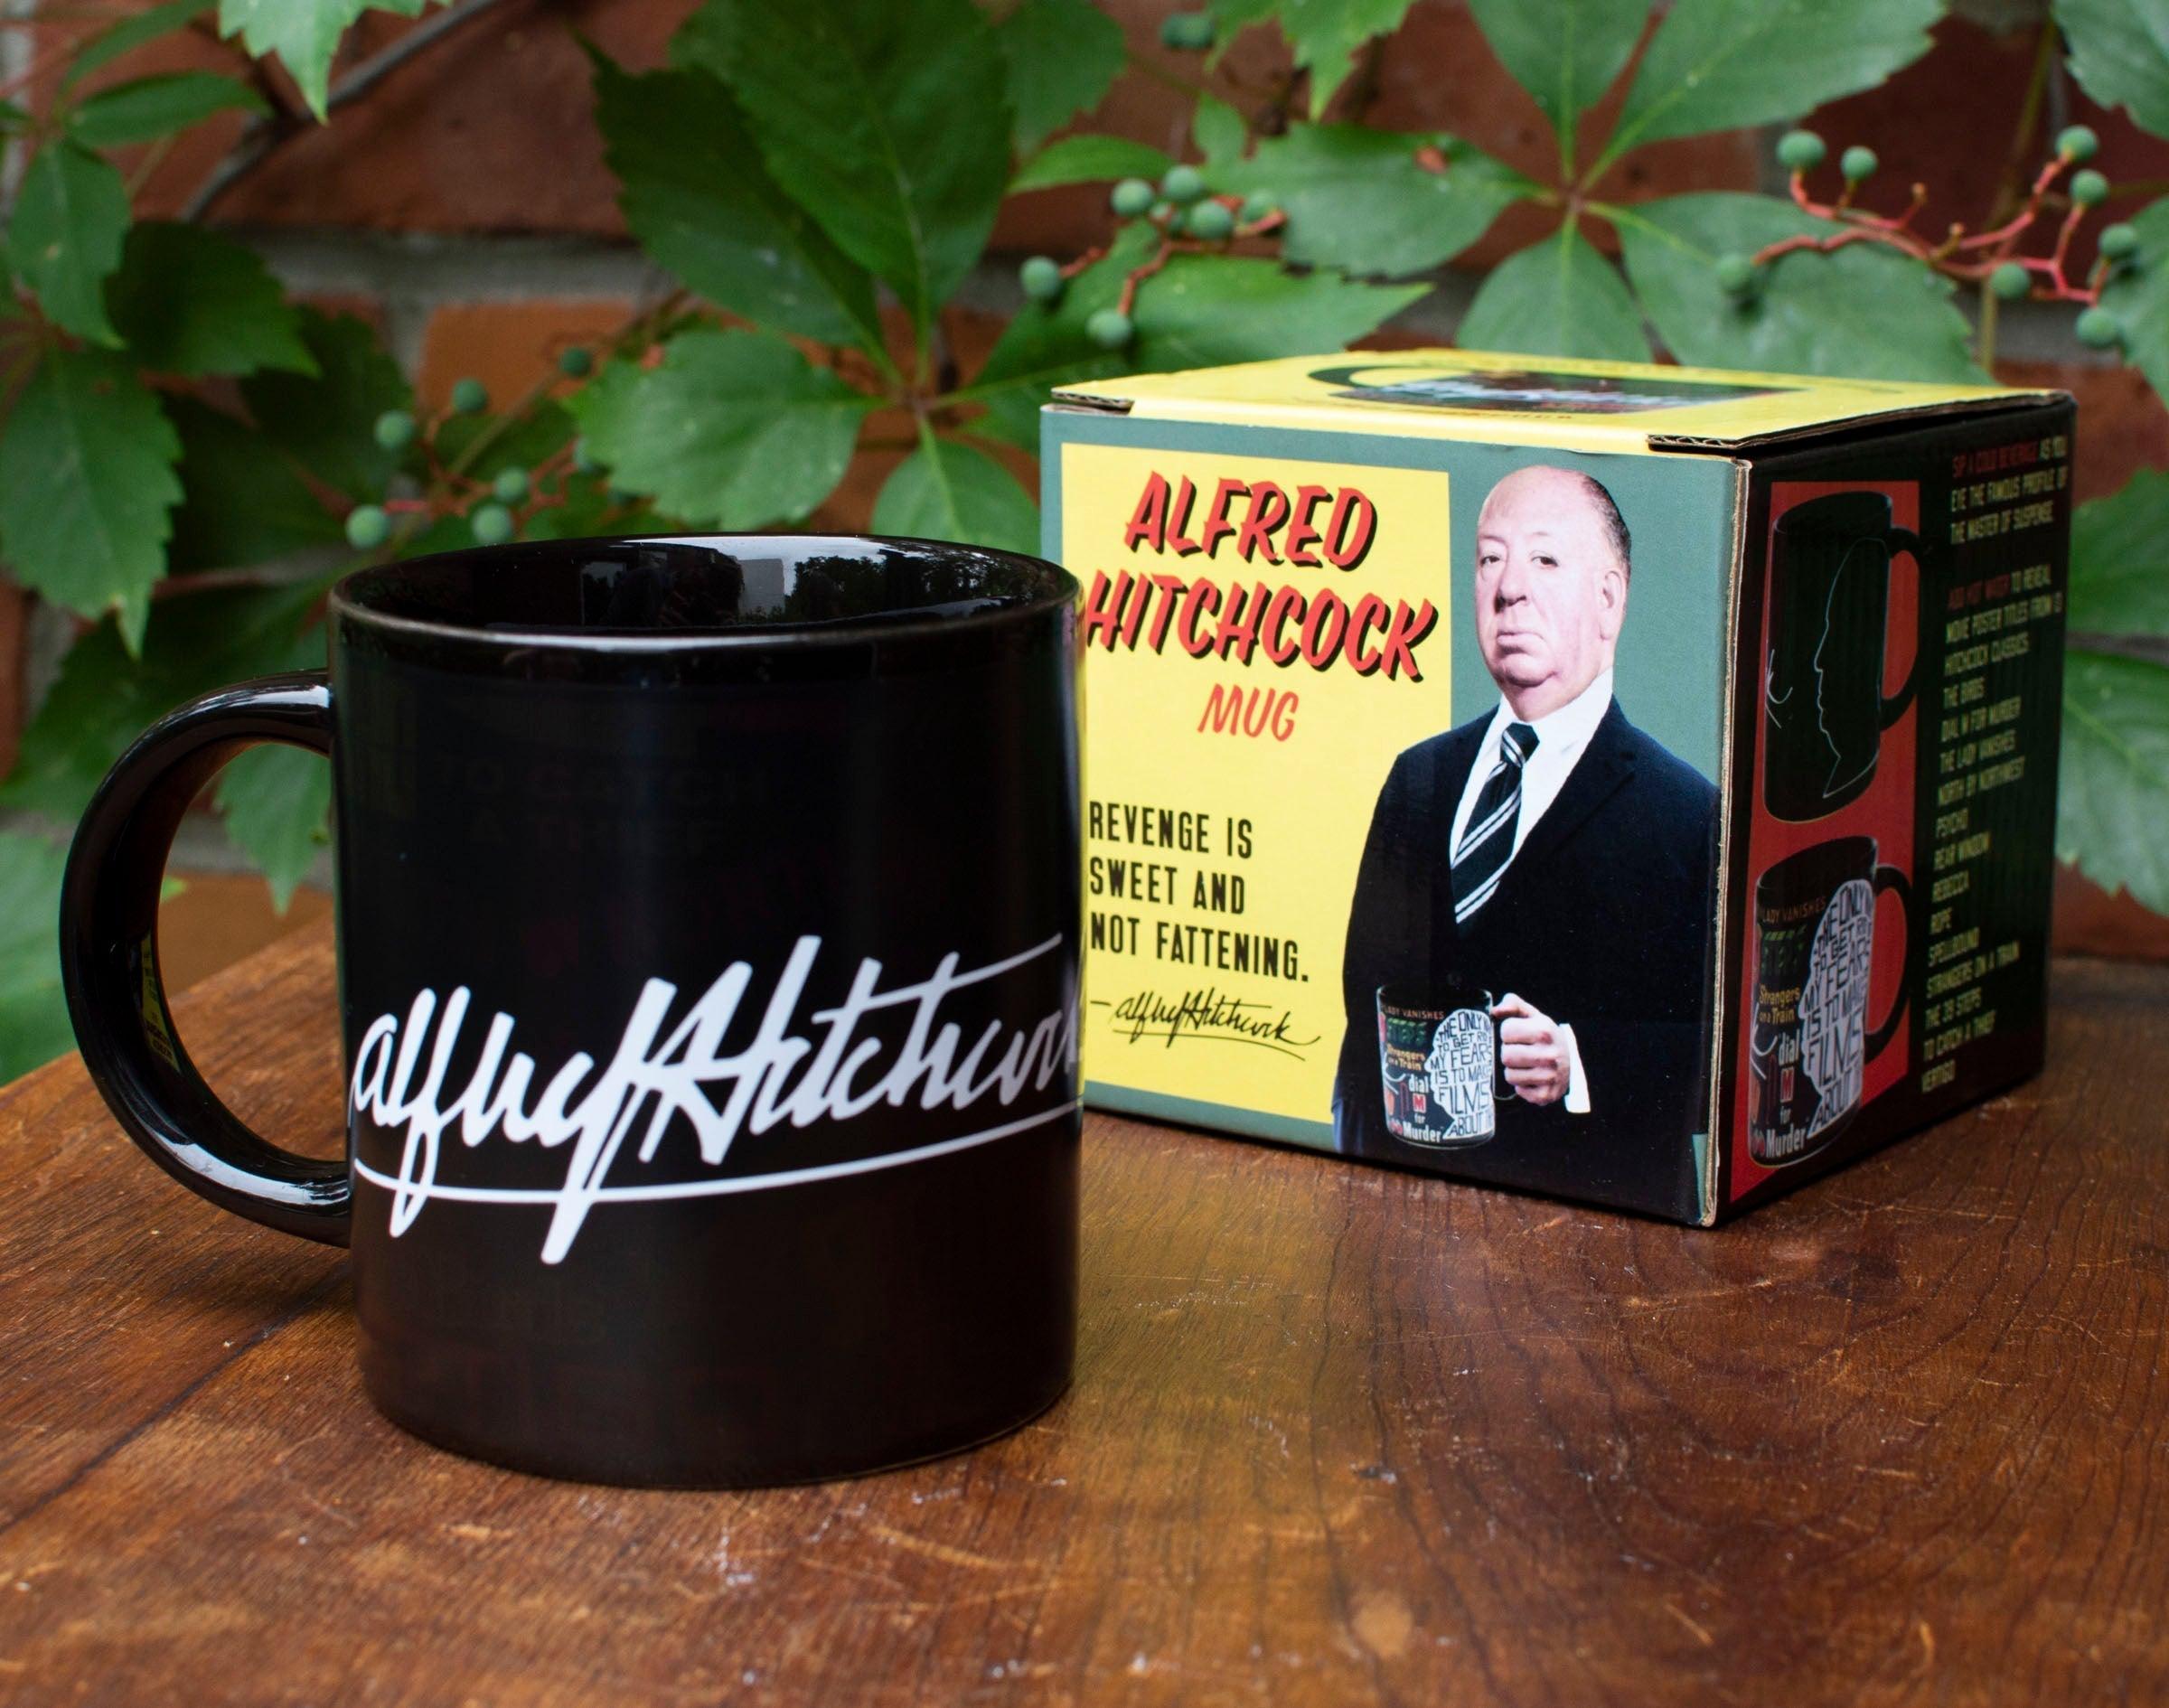 Product photo of Alfred Hitchcock Heat-Changing Mug, a novelty gift manufactured by The Unemployed Philosophers Guild.